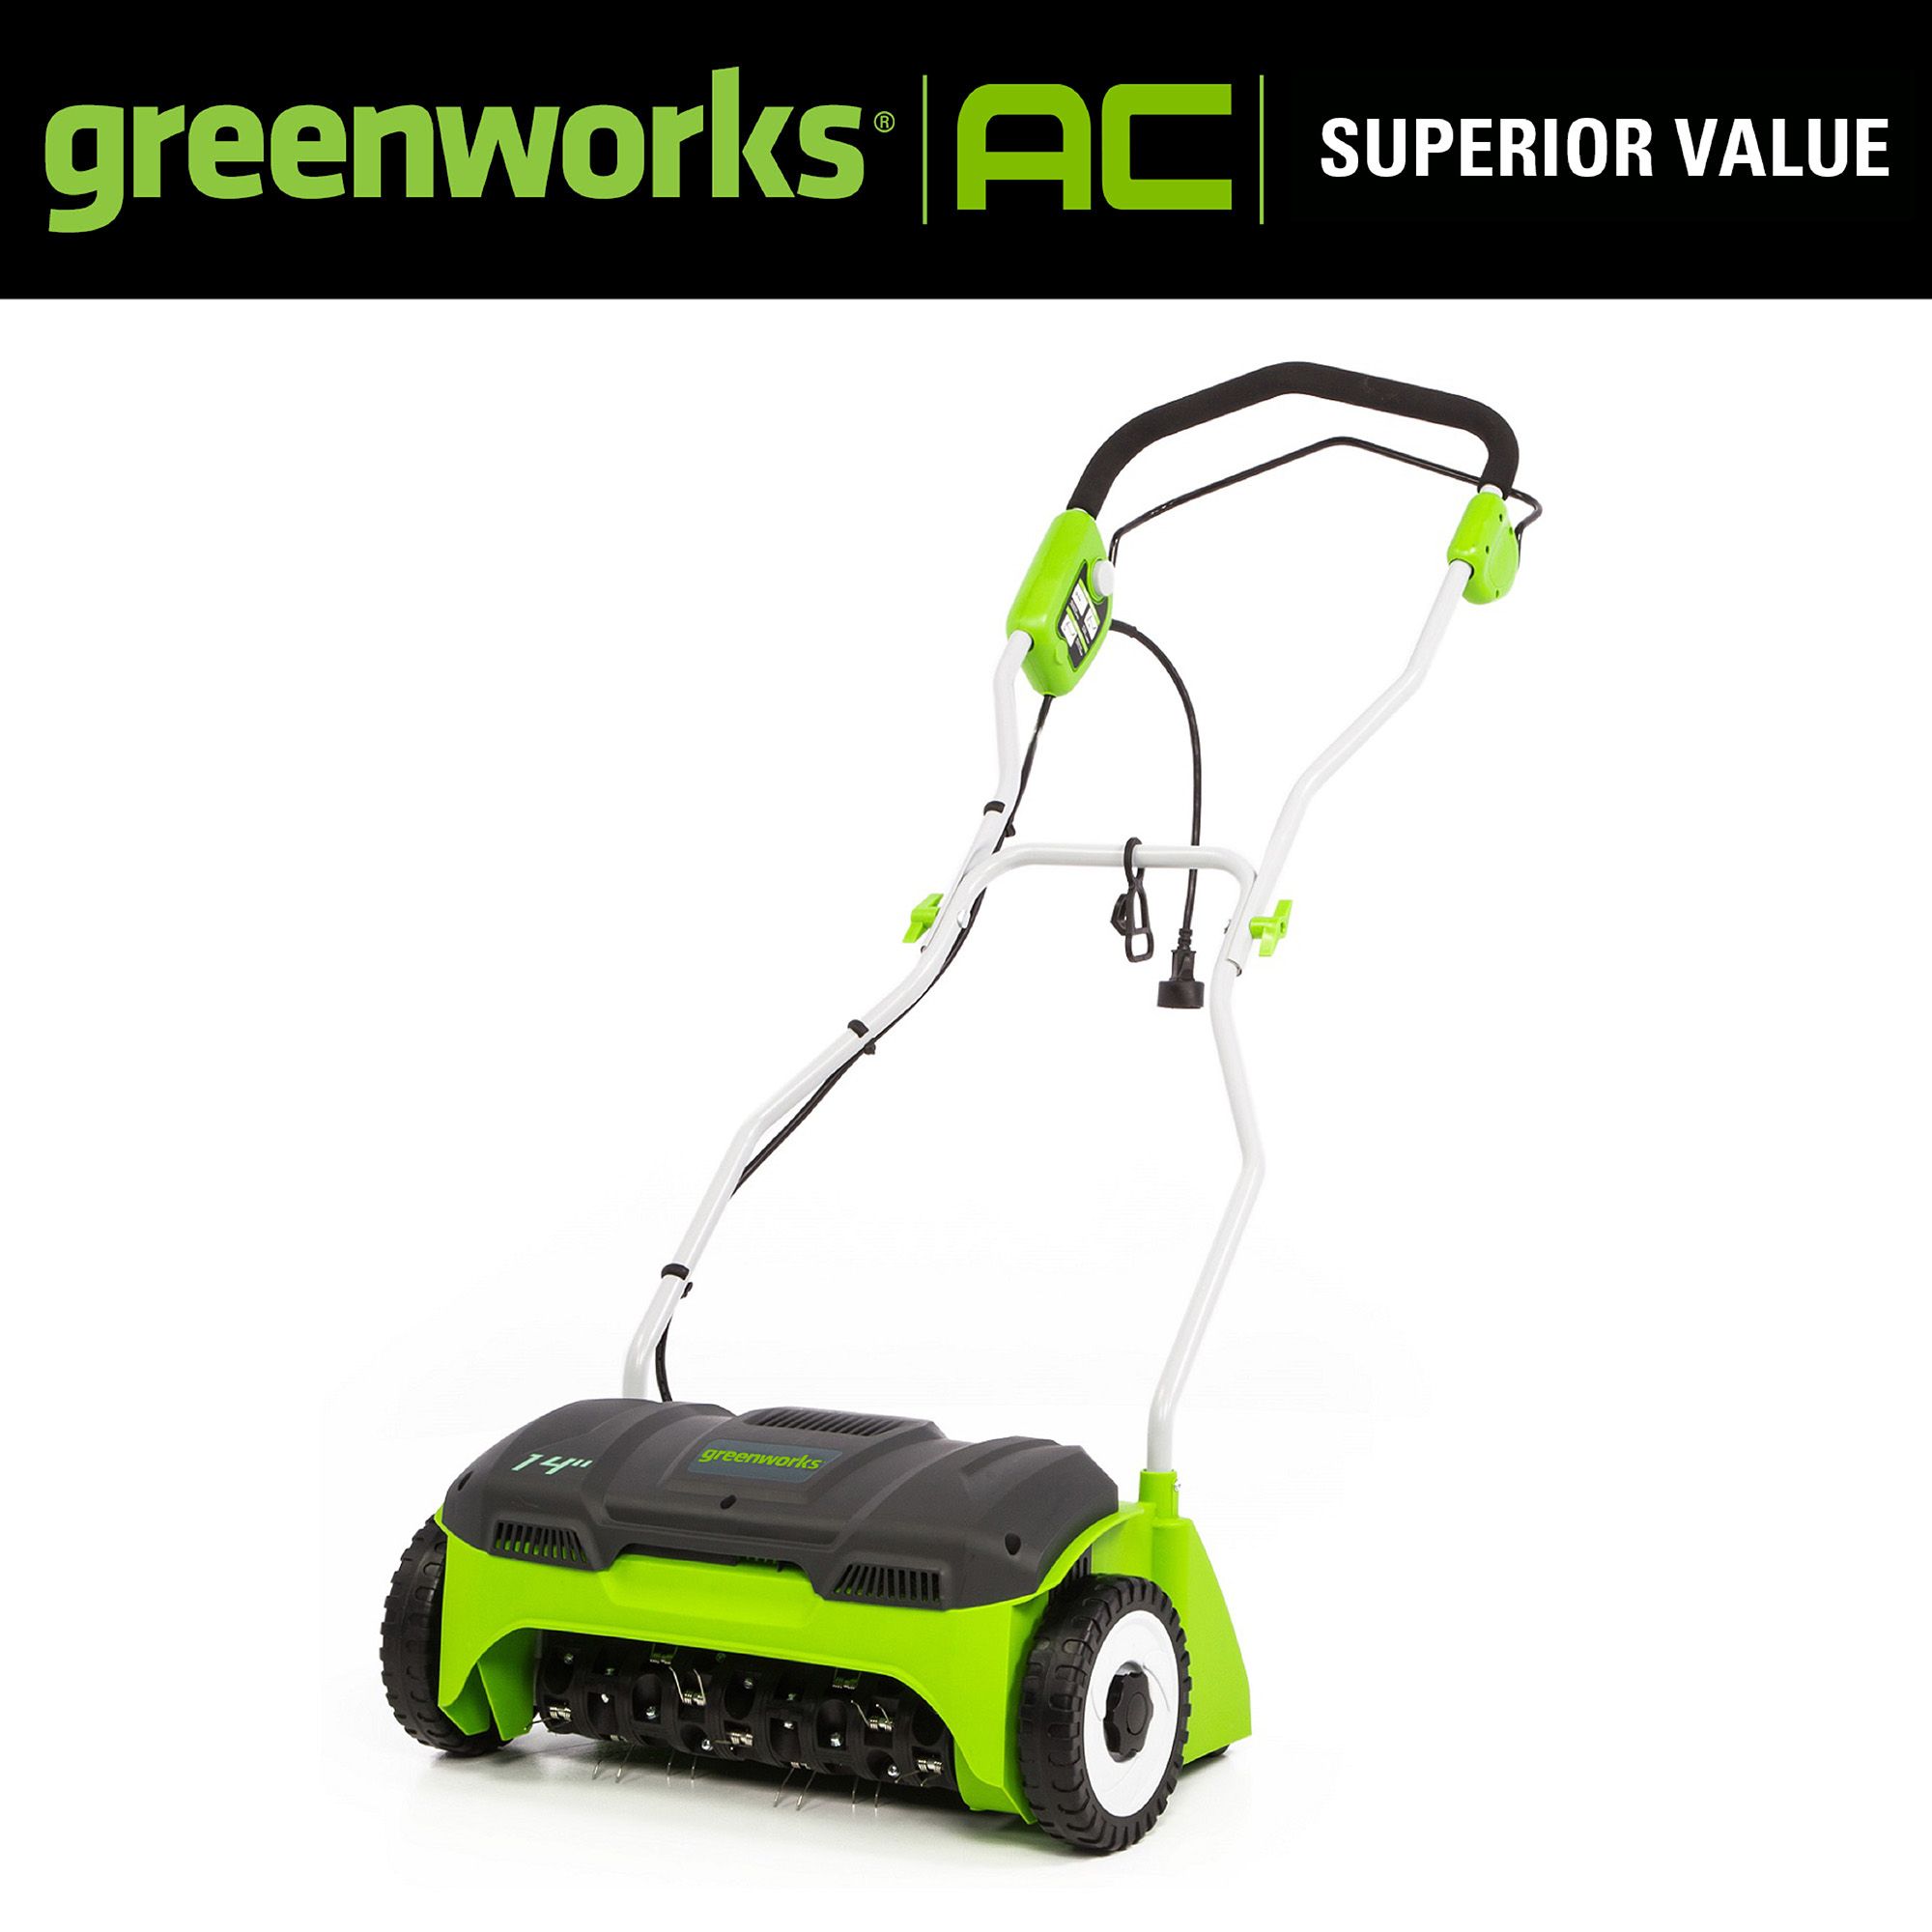 Greenworks 14 in. 10 Amp Corded Electric Dethatcher, DT14B00 - image 3 of 12